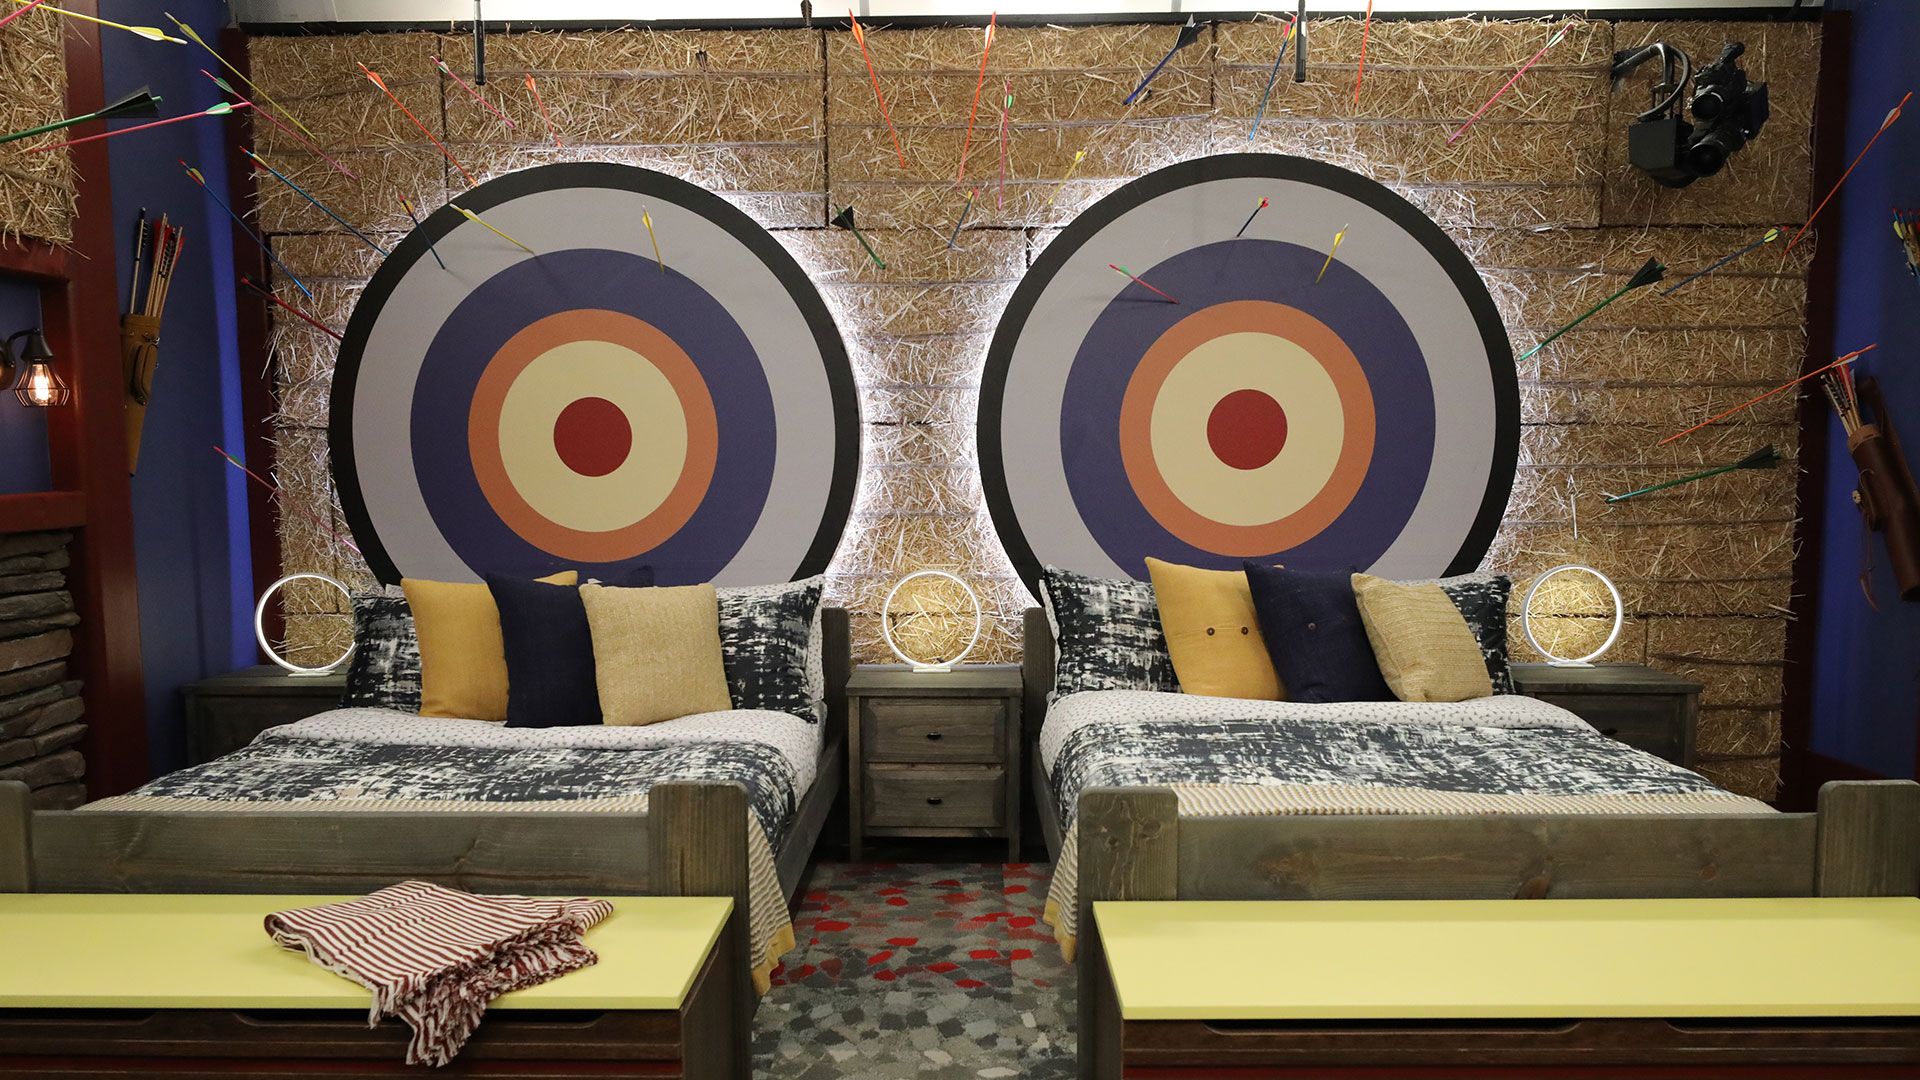 A bedroom for the HGs to pick their targets